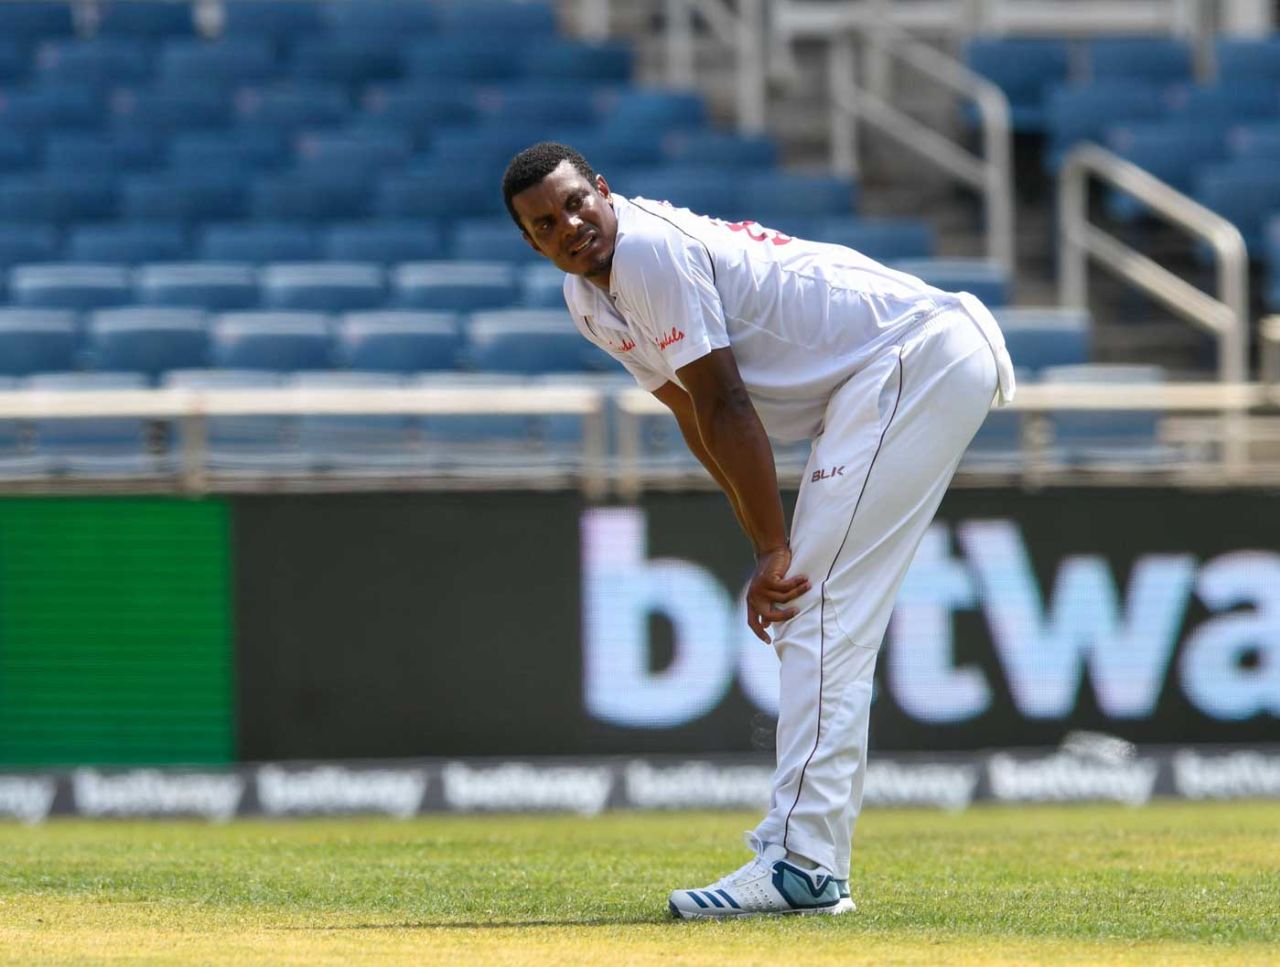 Shannon Gabriel catches his breath, West Indies v India, 2nd Test, 1st day, Kingston, August 30, 2019